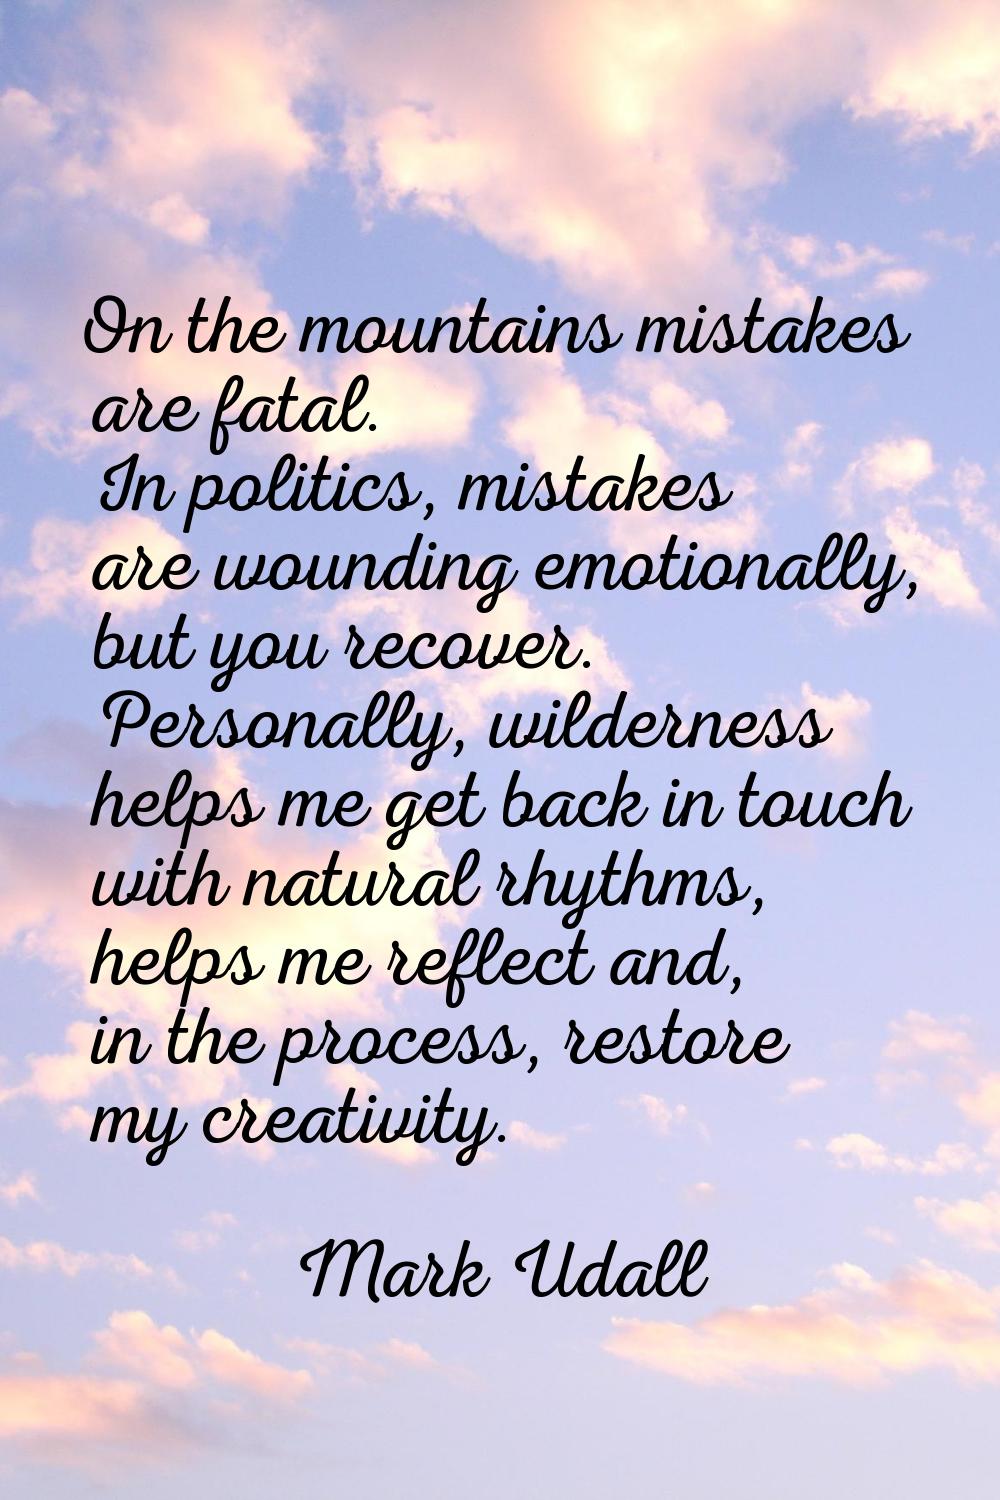 On the mountains mistakes are fatal. In politics, mistakes are wounding emotionally, but you recove